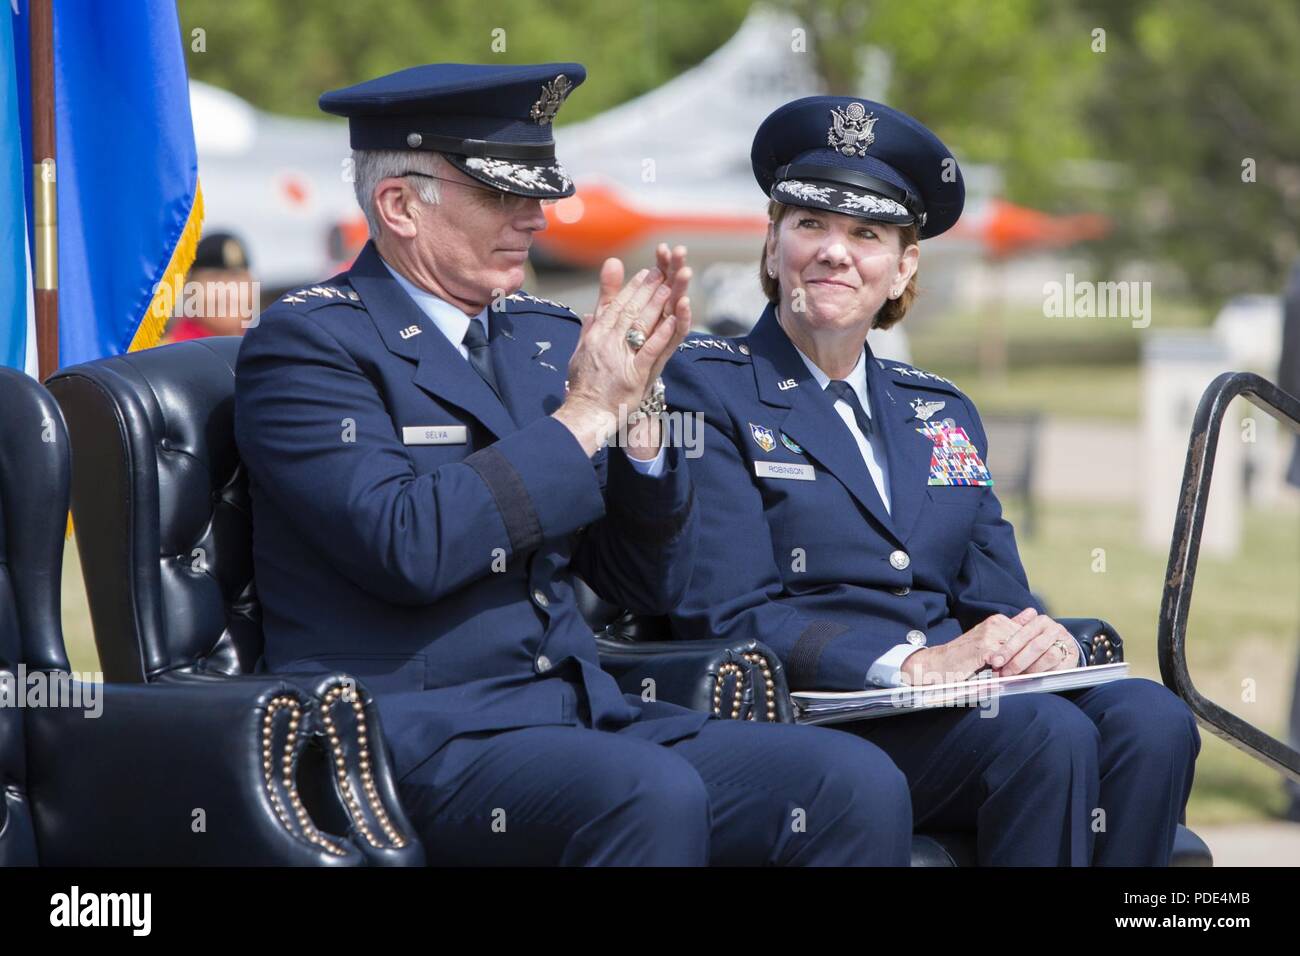 Vice Chairman of the Joint Chiefs of Staff, U.S. Air Force General Paul J. Selva, and the Commander of the North American Aerospace Defense Command and U.S. Northern Command, U.S. Air Force General Lori Robinson, participate in the NORAD 60th Anniversary Ceremony on Peterson Air Force Base Colorado, May 12. The ceremony and static display of various NORAD aircraft was the culmination of a three-day event, which included a media tour of Cheyenne Mountain Air Force Station, the dedication of a cairn outside the commands’ headquarters building memorializing the Canadians who have passed away whil Stock Photo